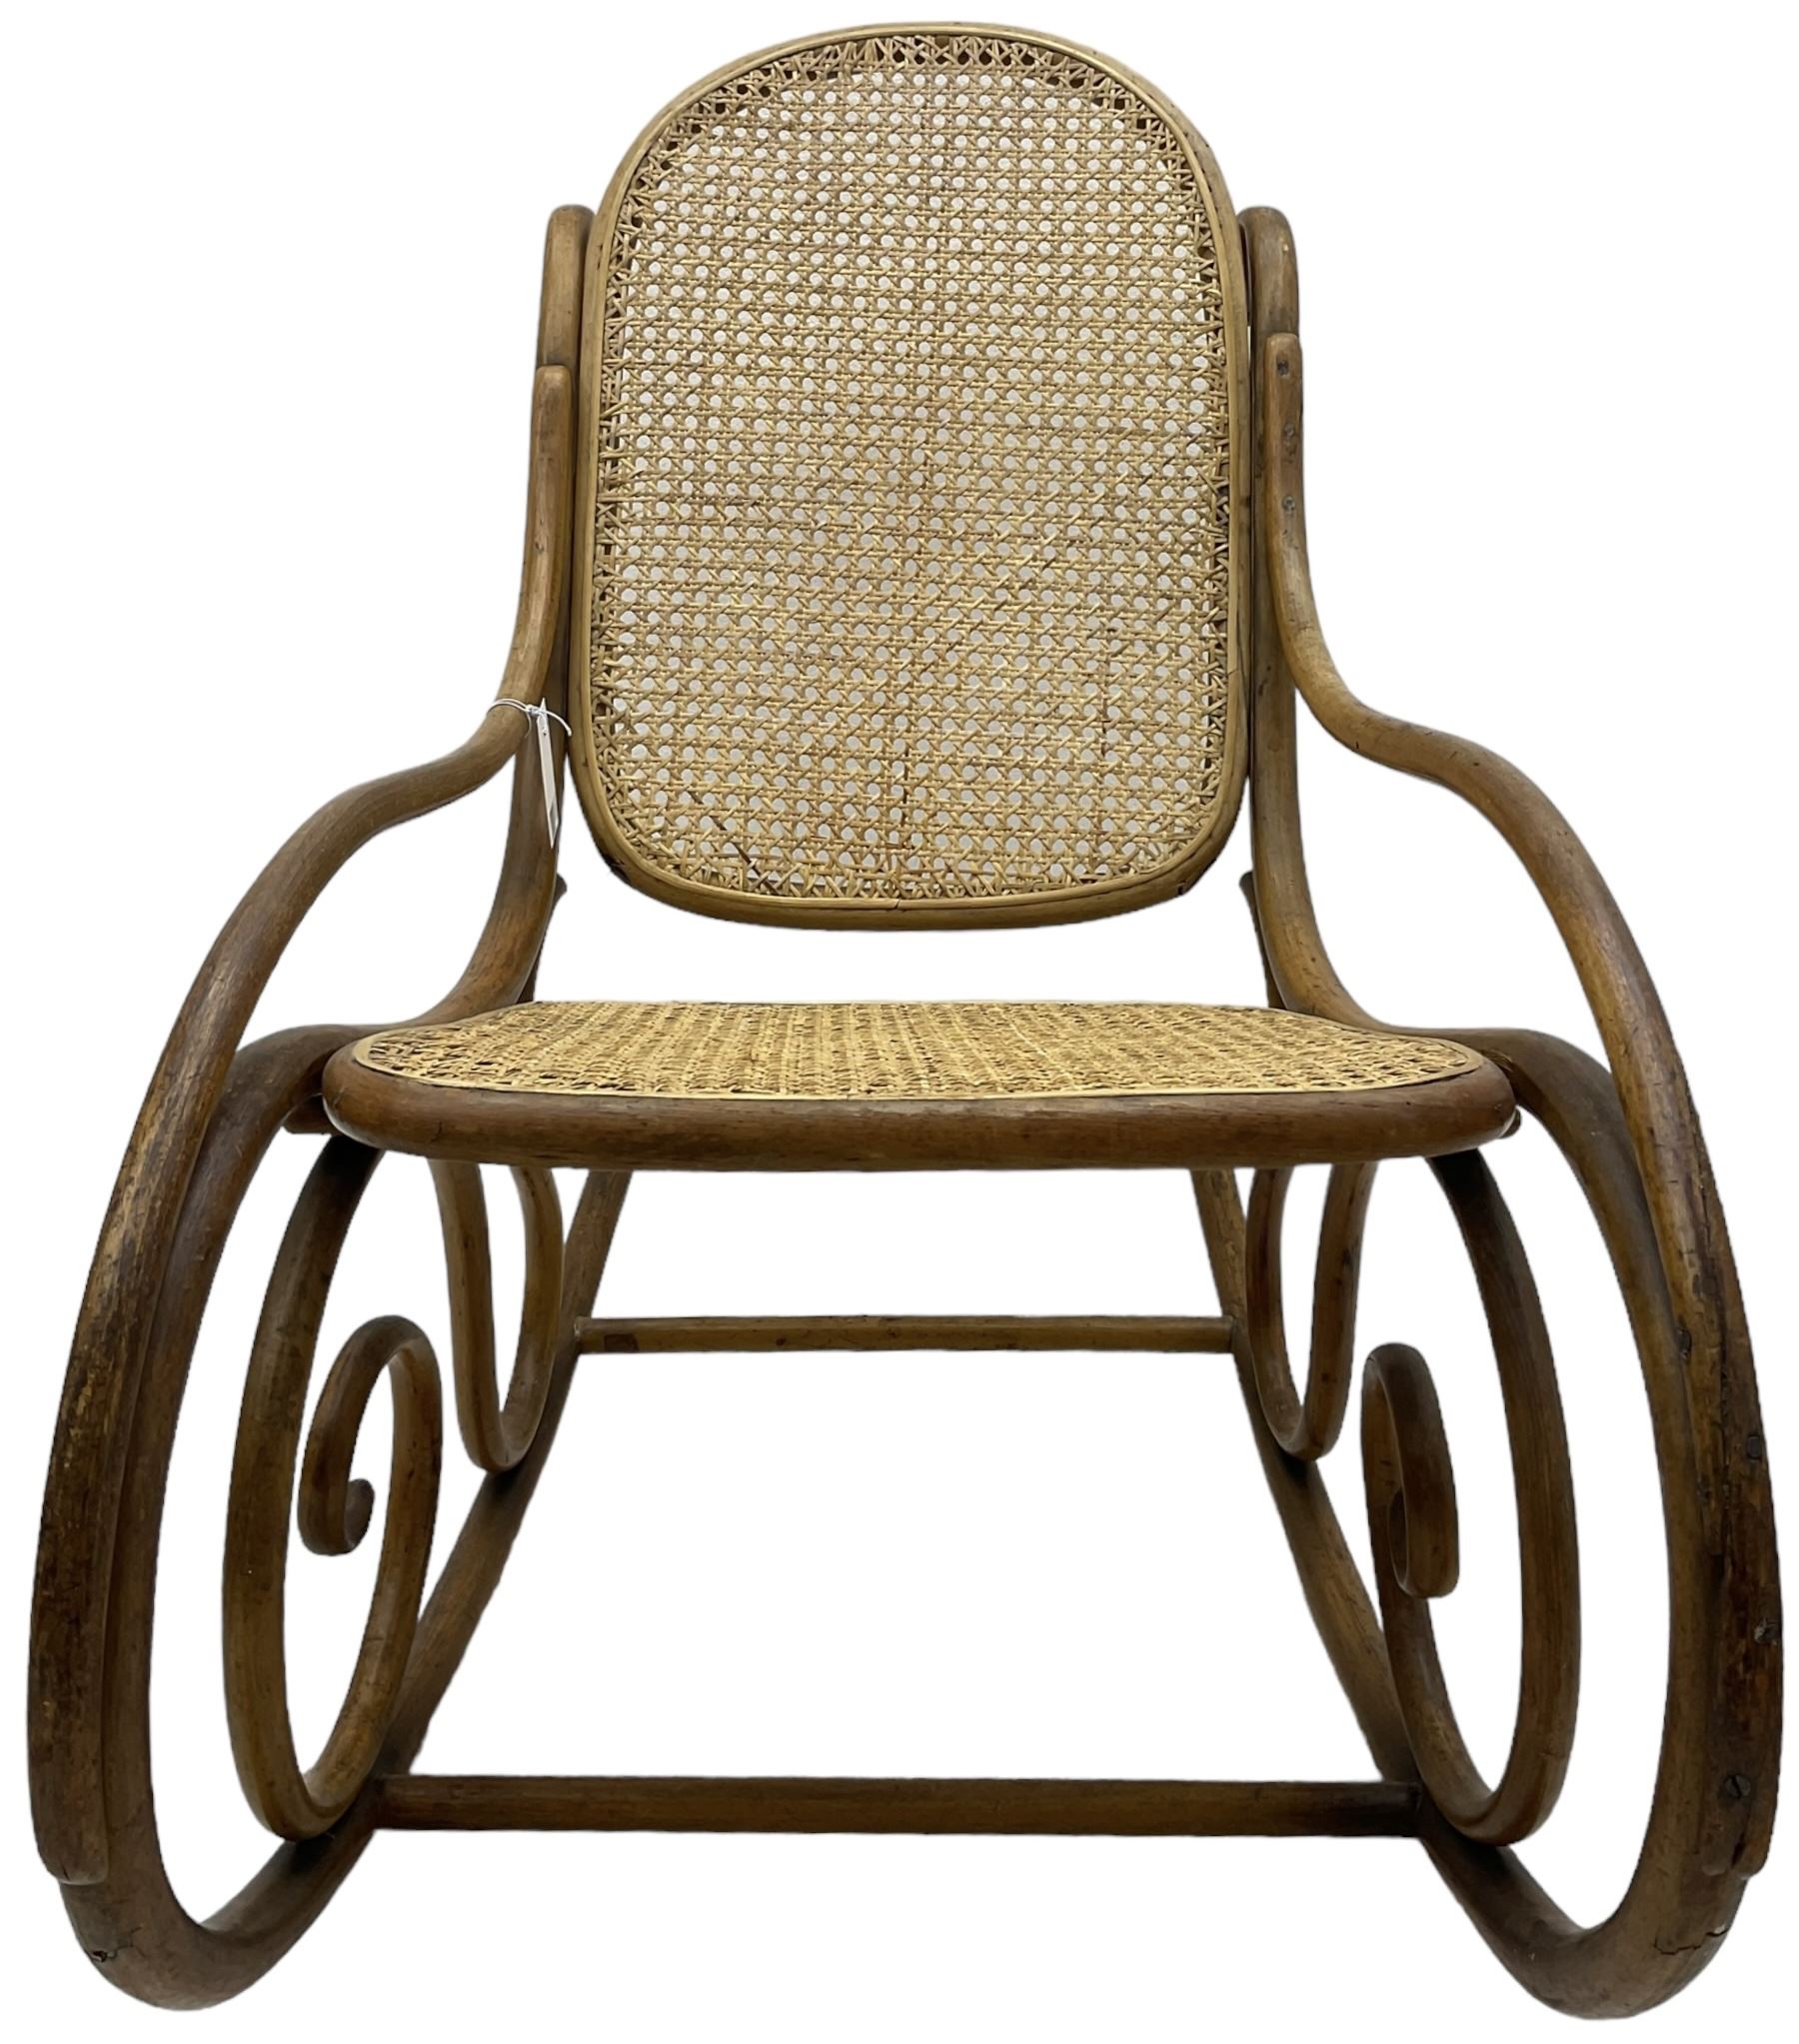 Early 20th century Michael Thonet design bentwood rocking chair - Image 4 of 7